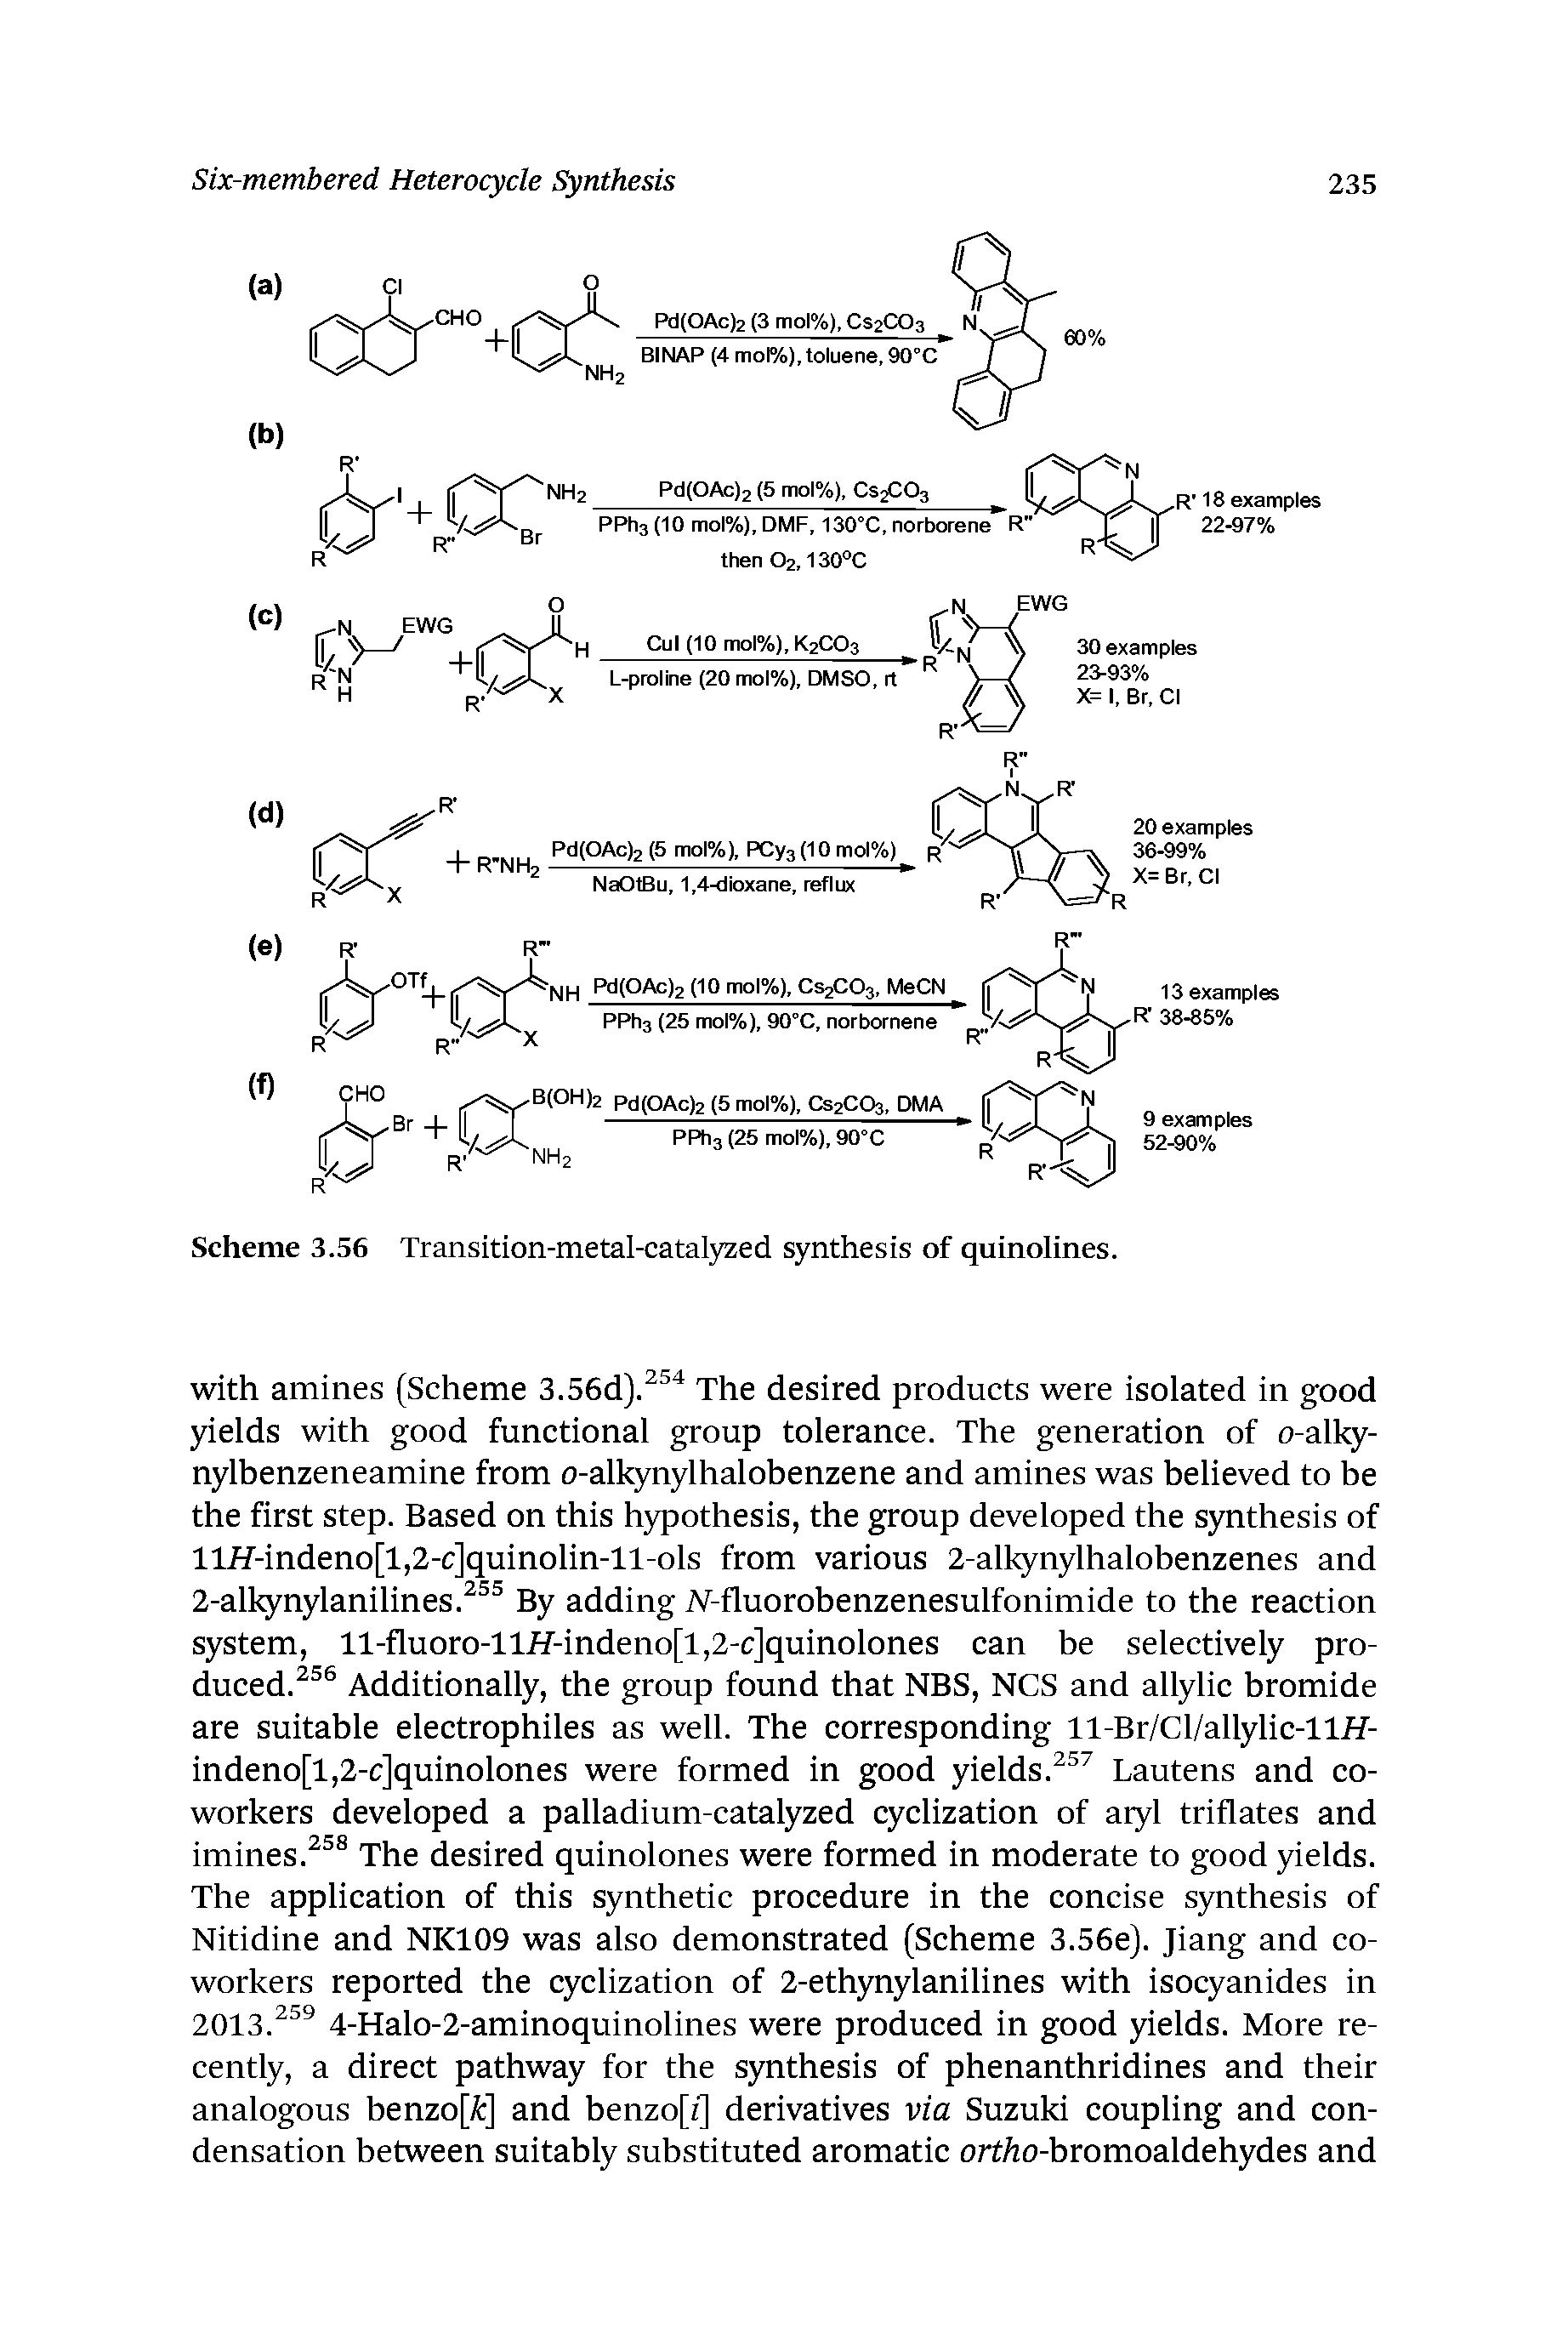 Scheme 3.56 Transition-metal-catalyzed synthesis of quinolines.